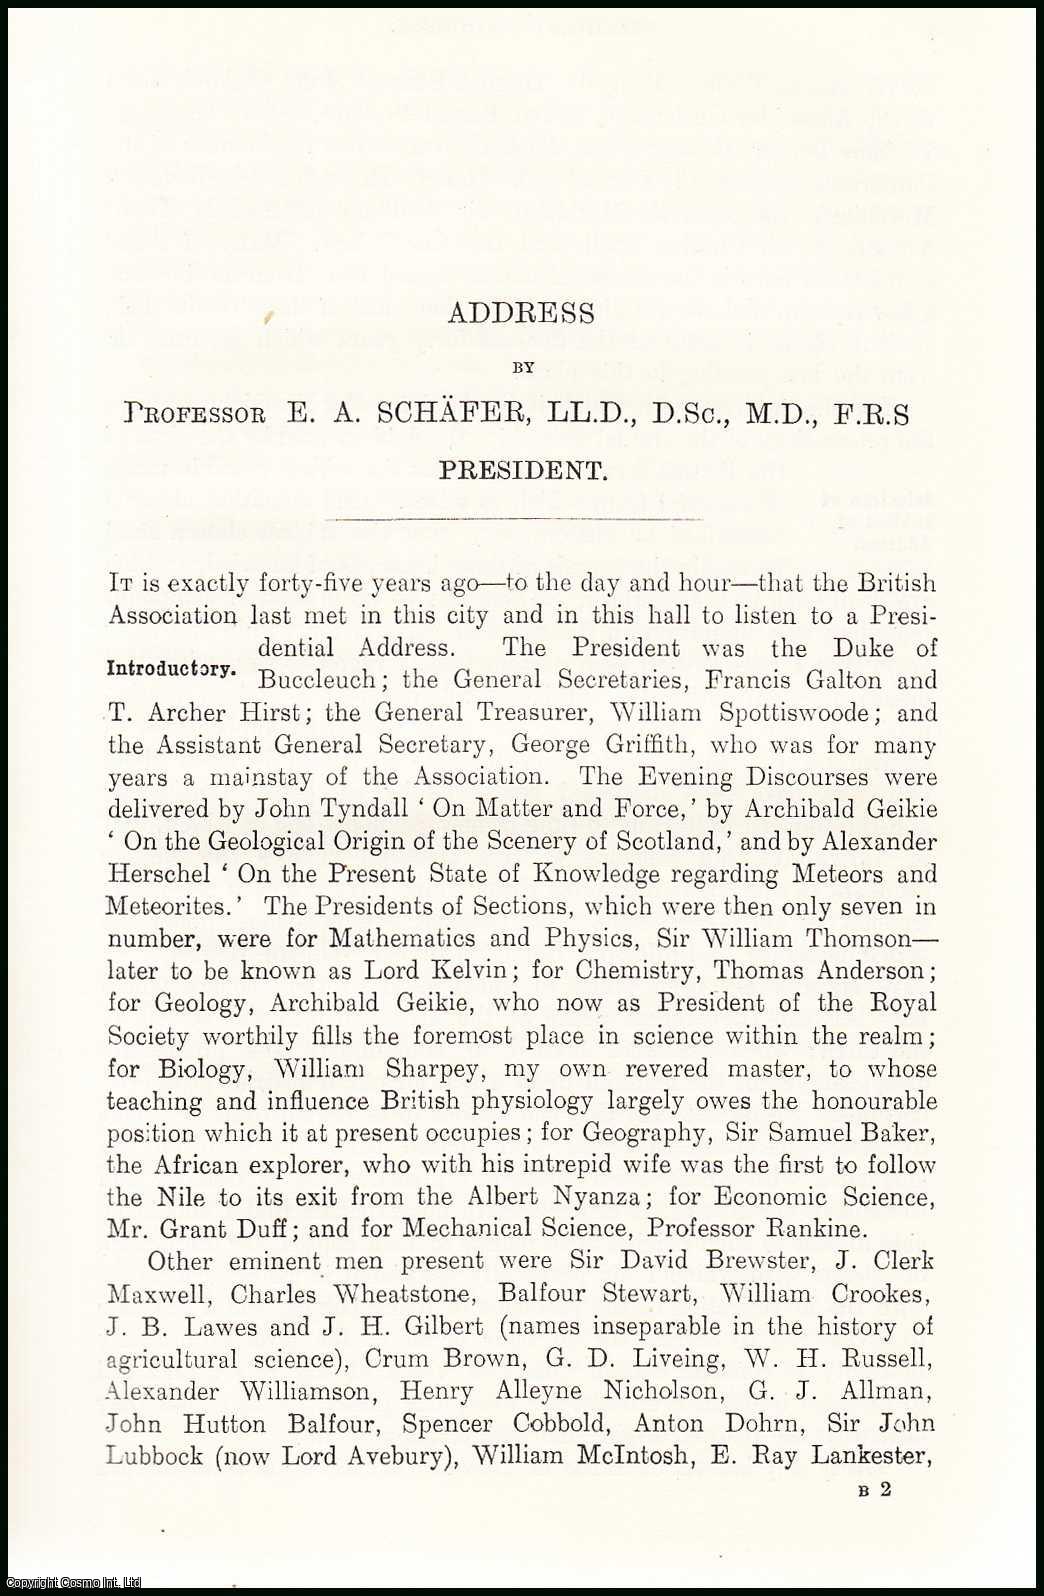 Professor E.A. Schafer, LL.D., D.Sc., M.D., F.R.S. President. - Professor E.A. Schafer, Presidential Address, 1912 to the British Association, Meeting at Dundee. An uncommon original article from The British Association for The Advancement of Science report, 1912.